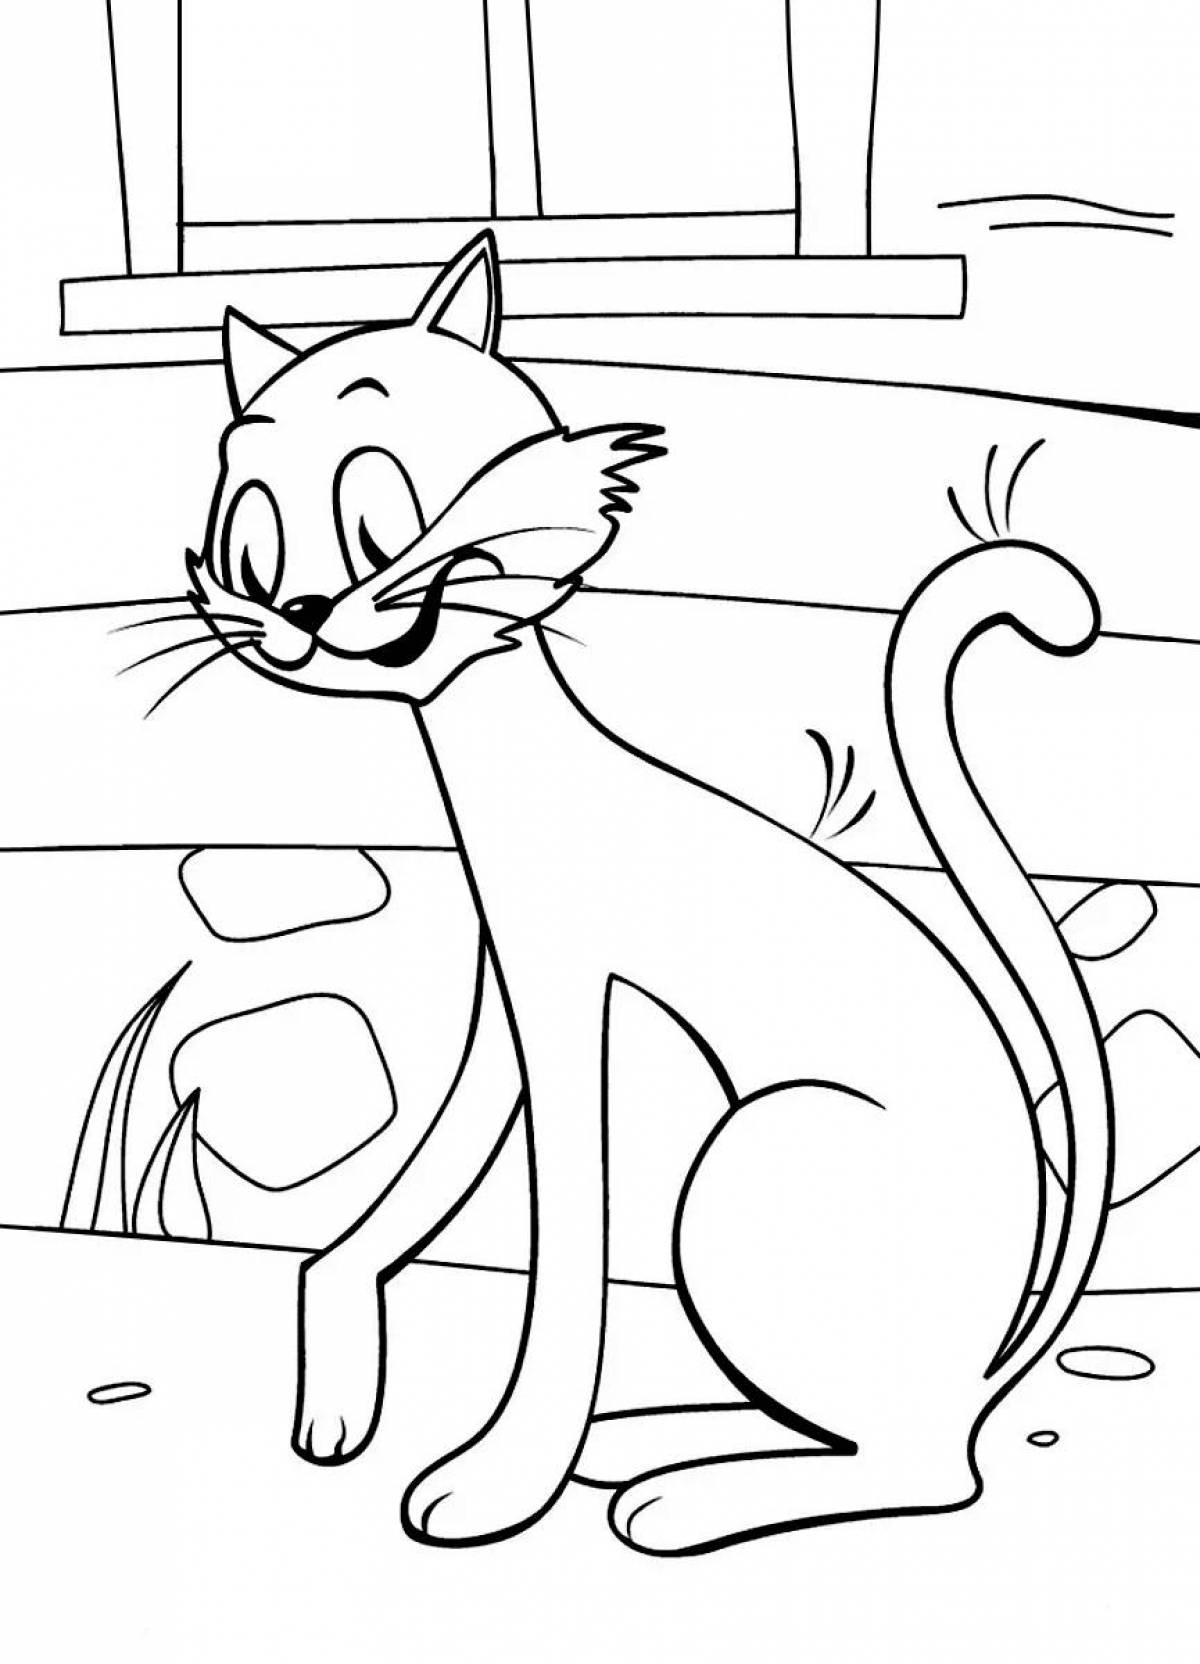 Coloring page energetic kitten